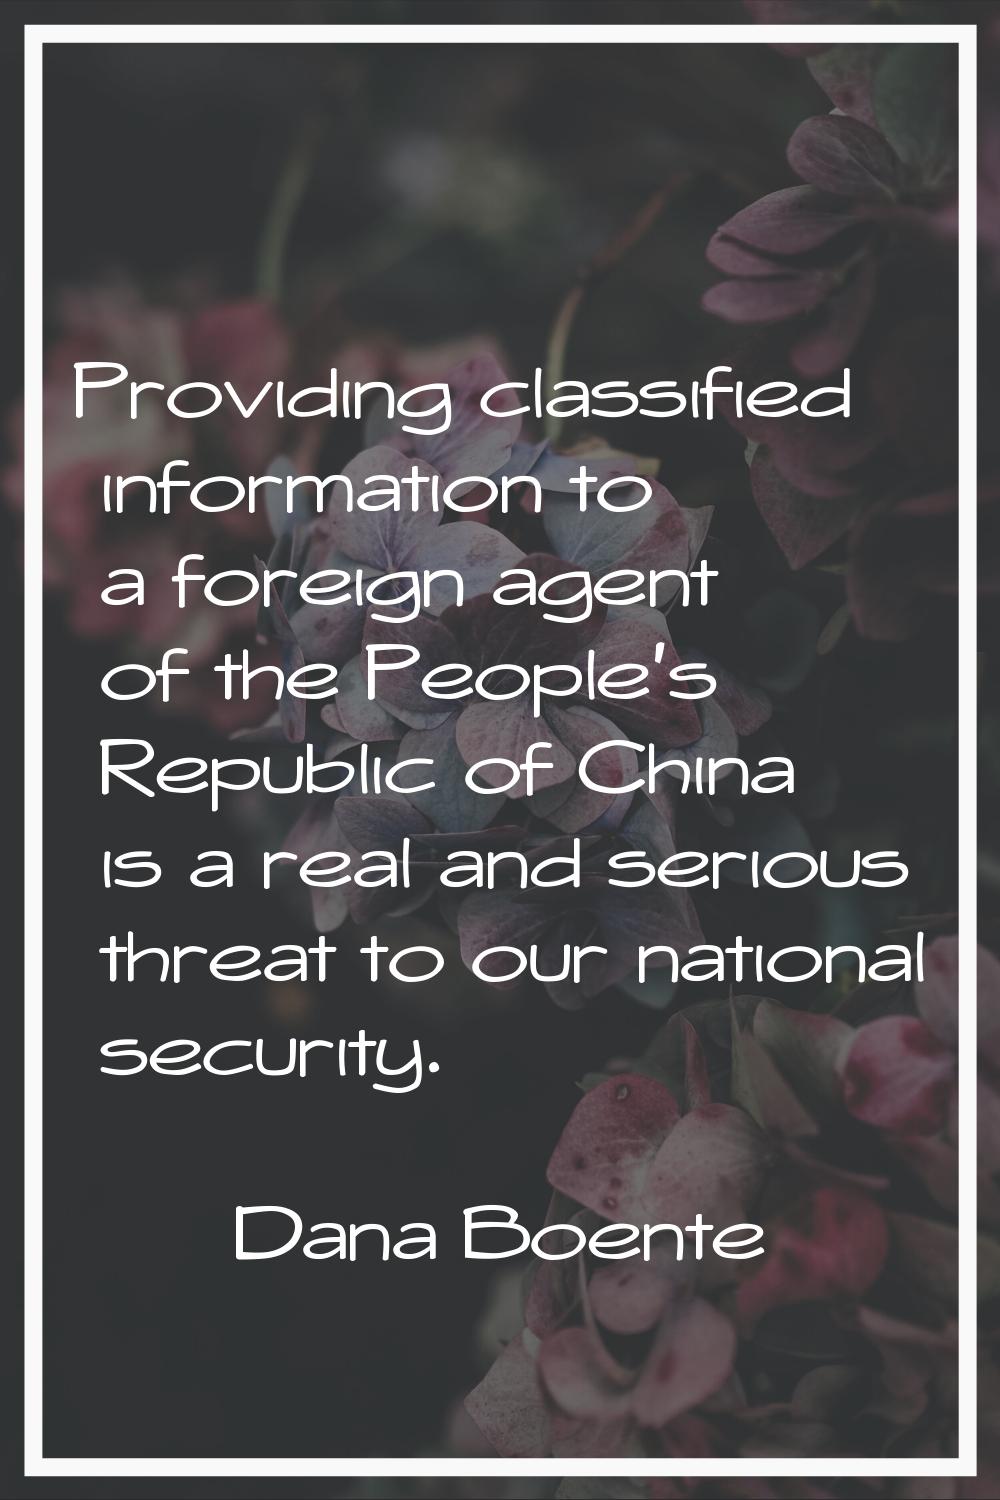 Providing classified information to a foreign agent of the People's Republic of China is a real and